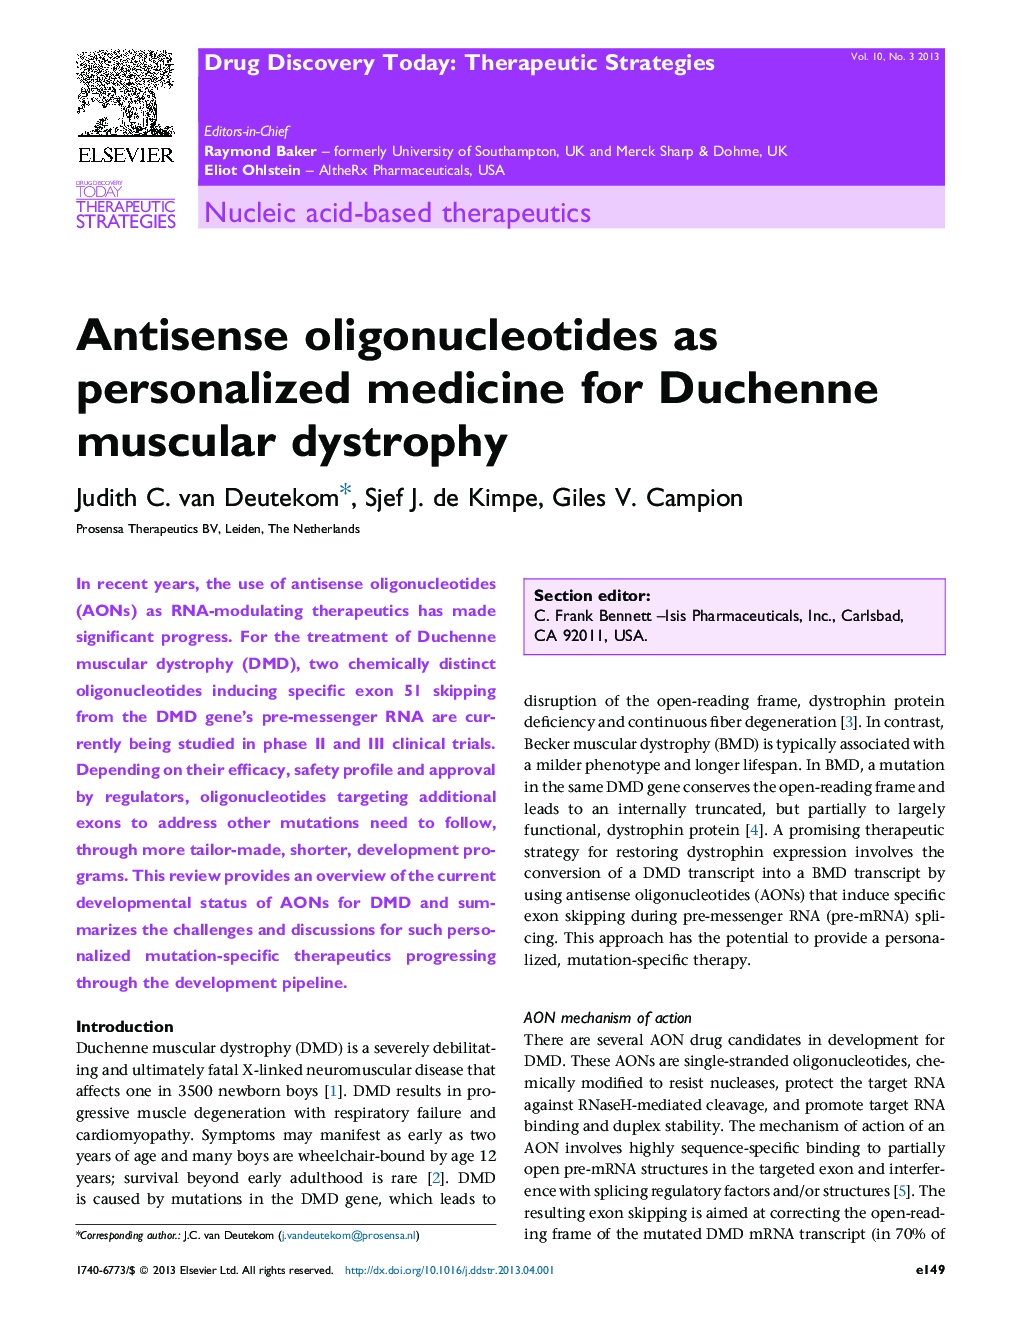 Antisense oligonucleotides as personalized medicine for Duchenne muscular dystrophy